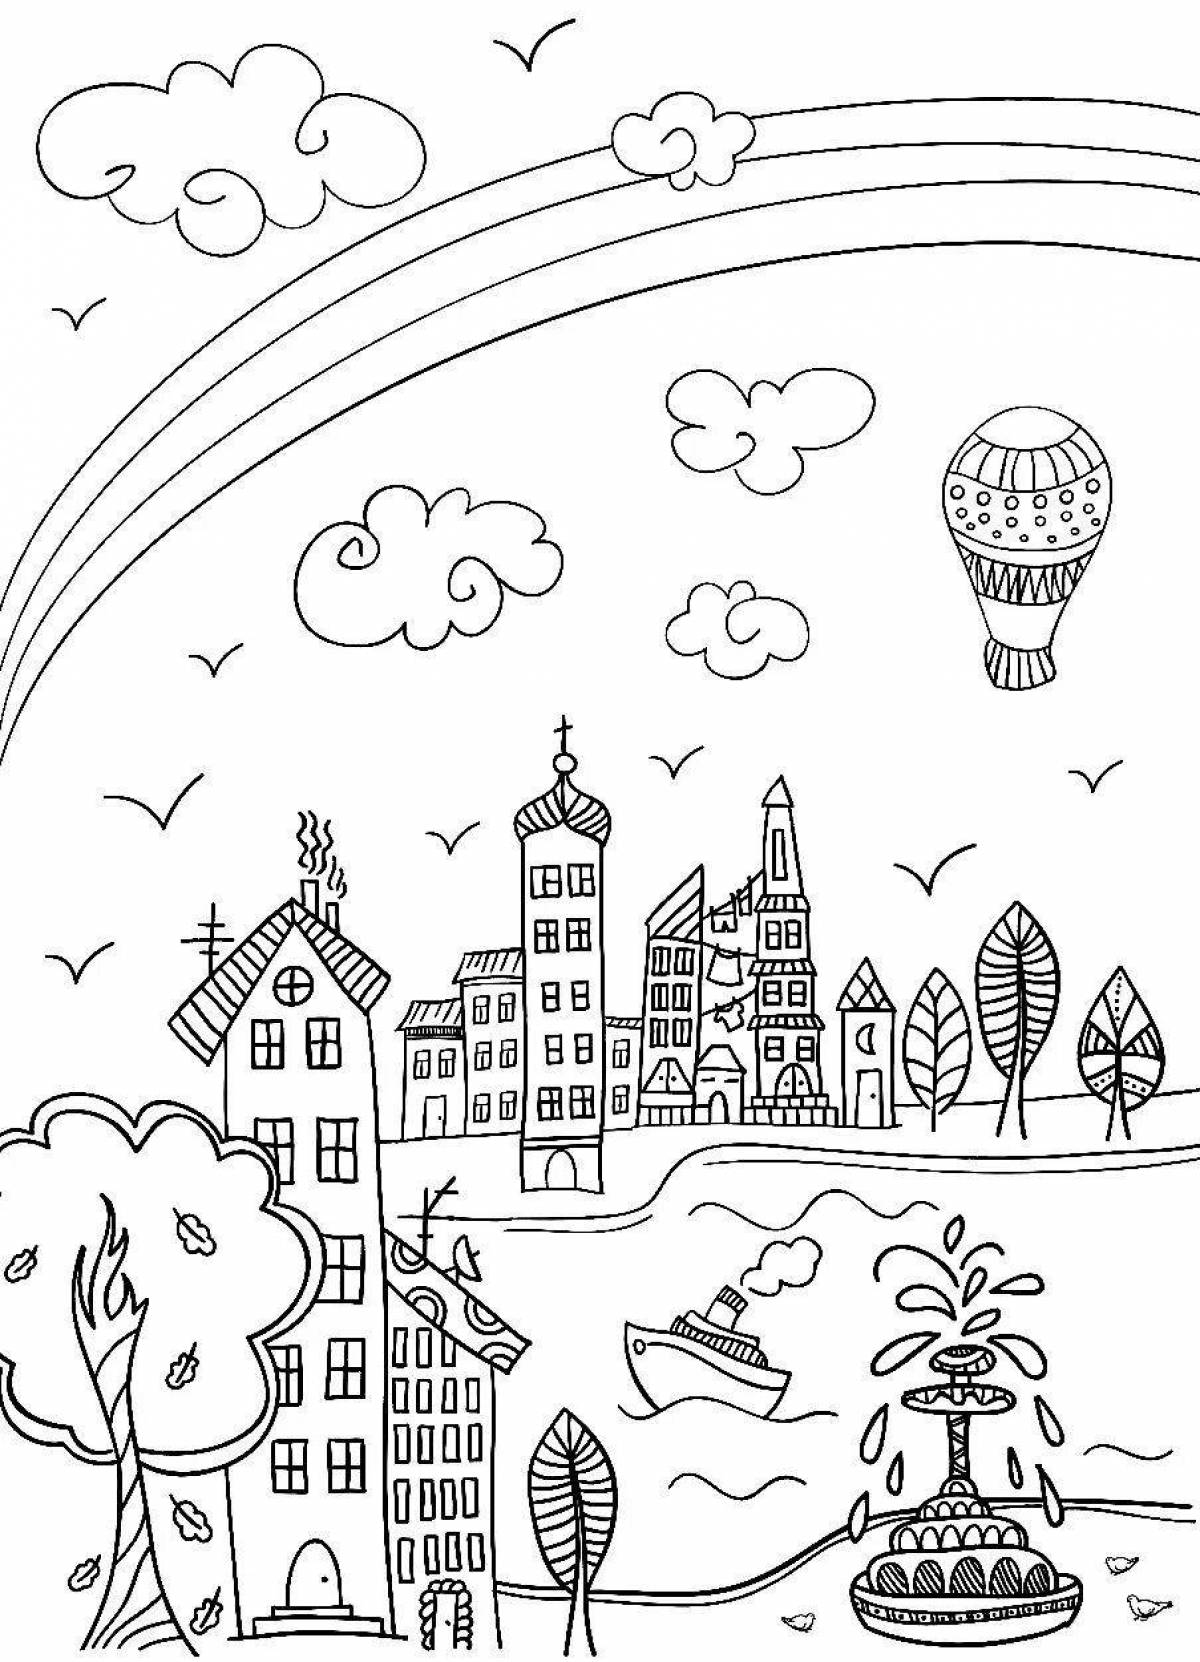 Adorable rainbow house coloring page